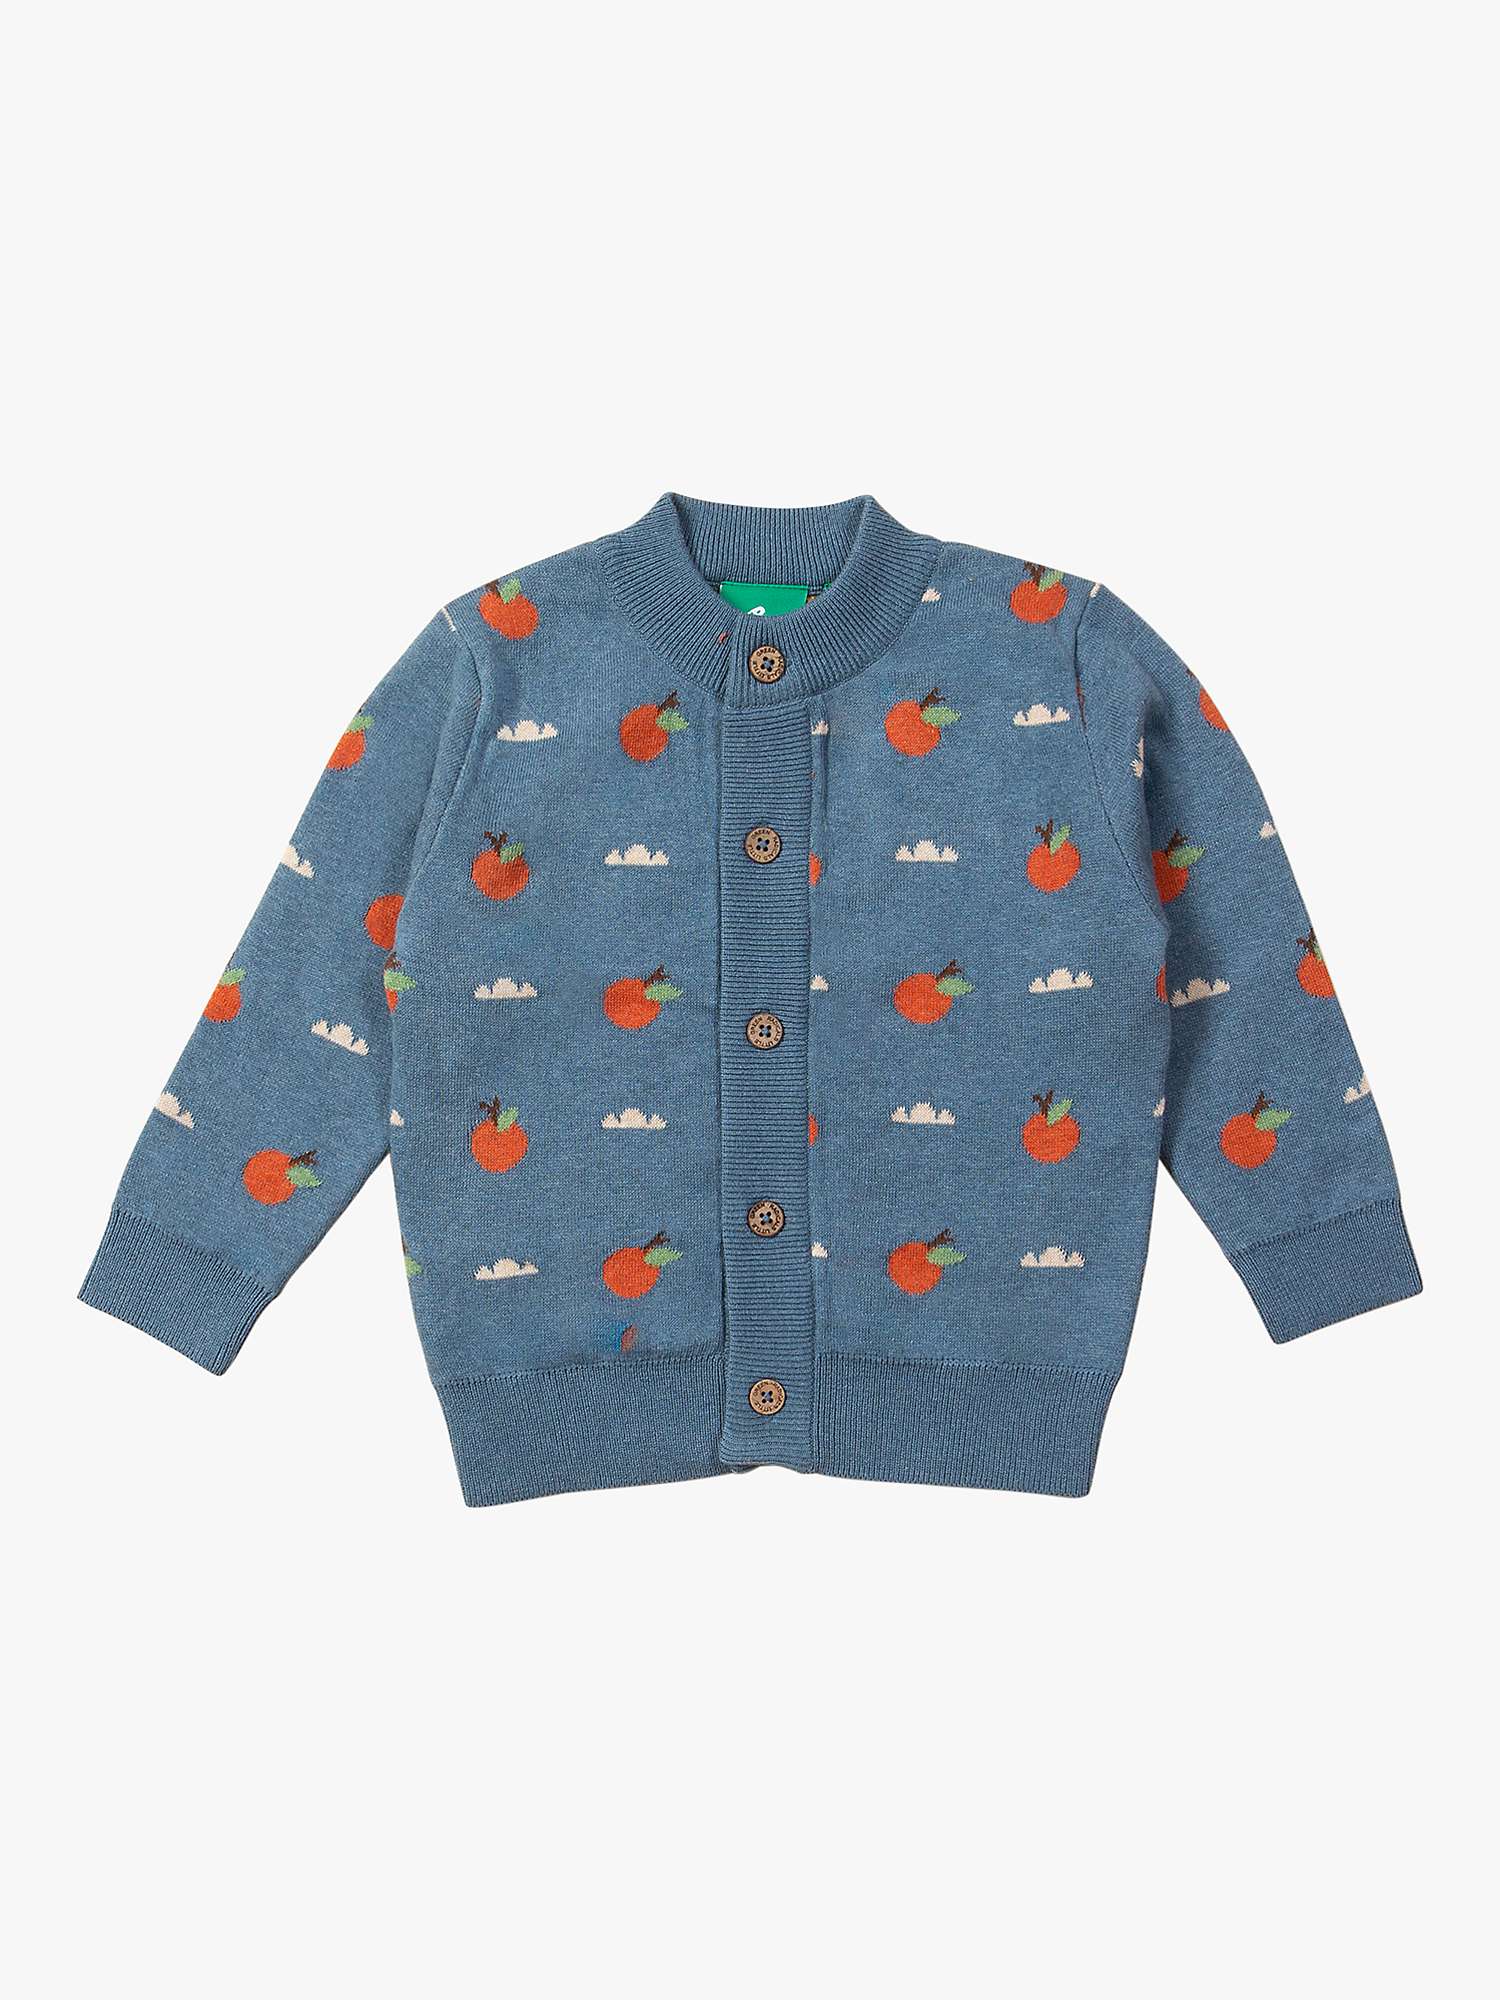 Buy Little Green Radicals Baby Organic Cotton From One To Another Orange Days Knit Cardigan, Blue Online at johnlewis.com